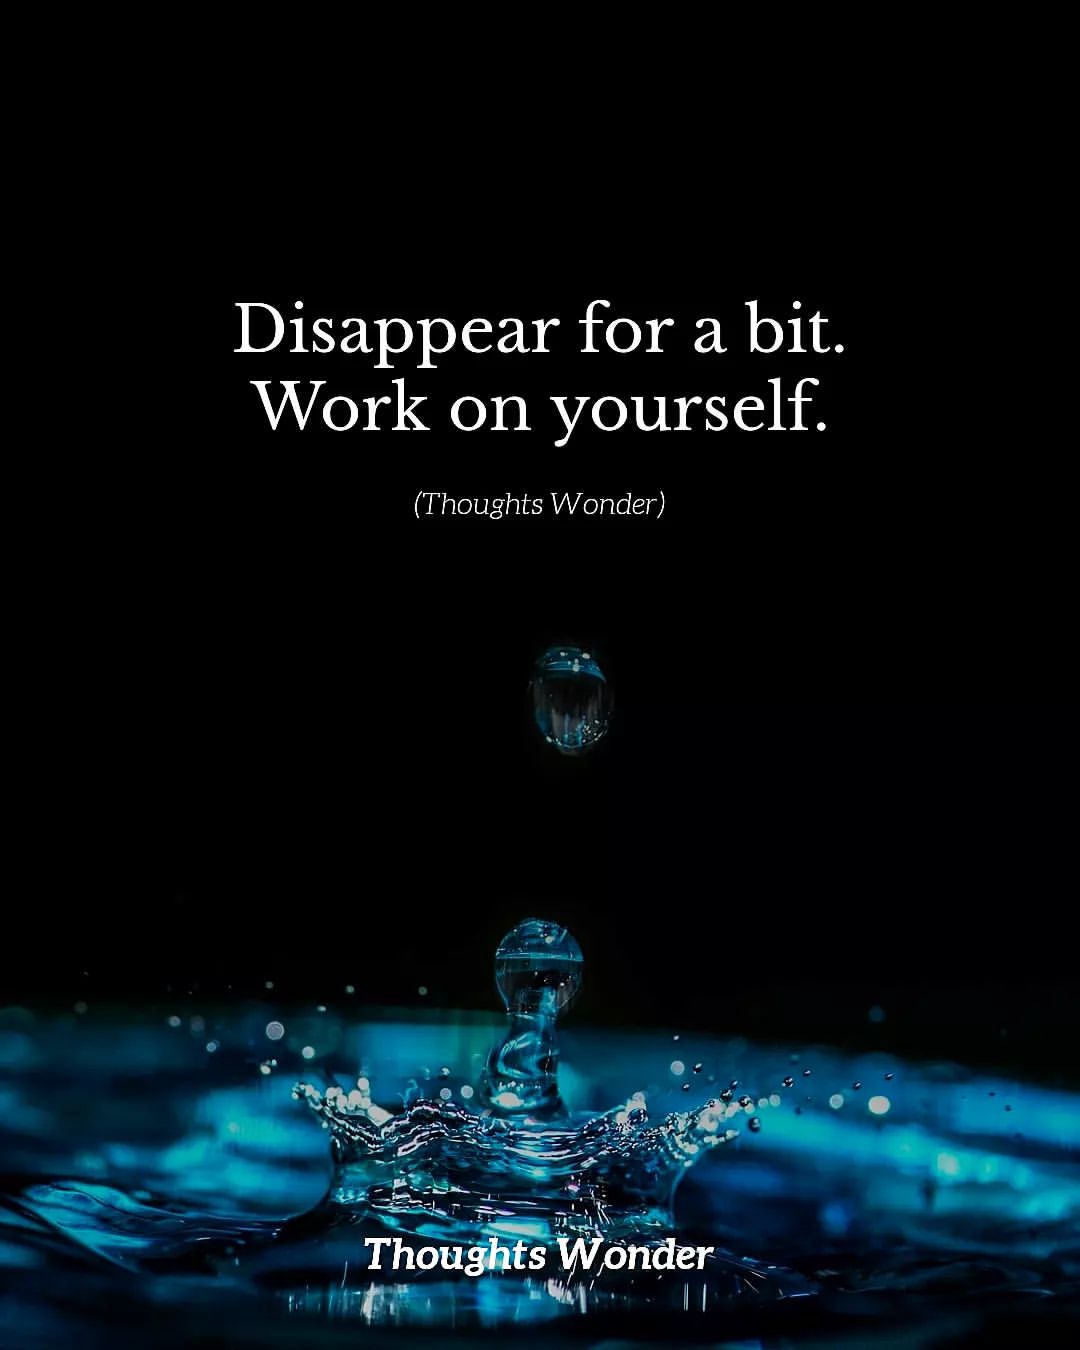 Disappear for a bit. Work on yourself.